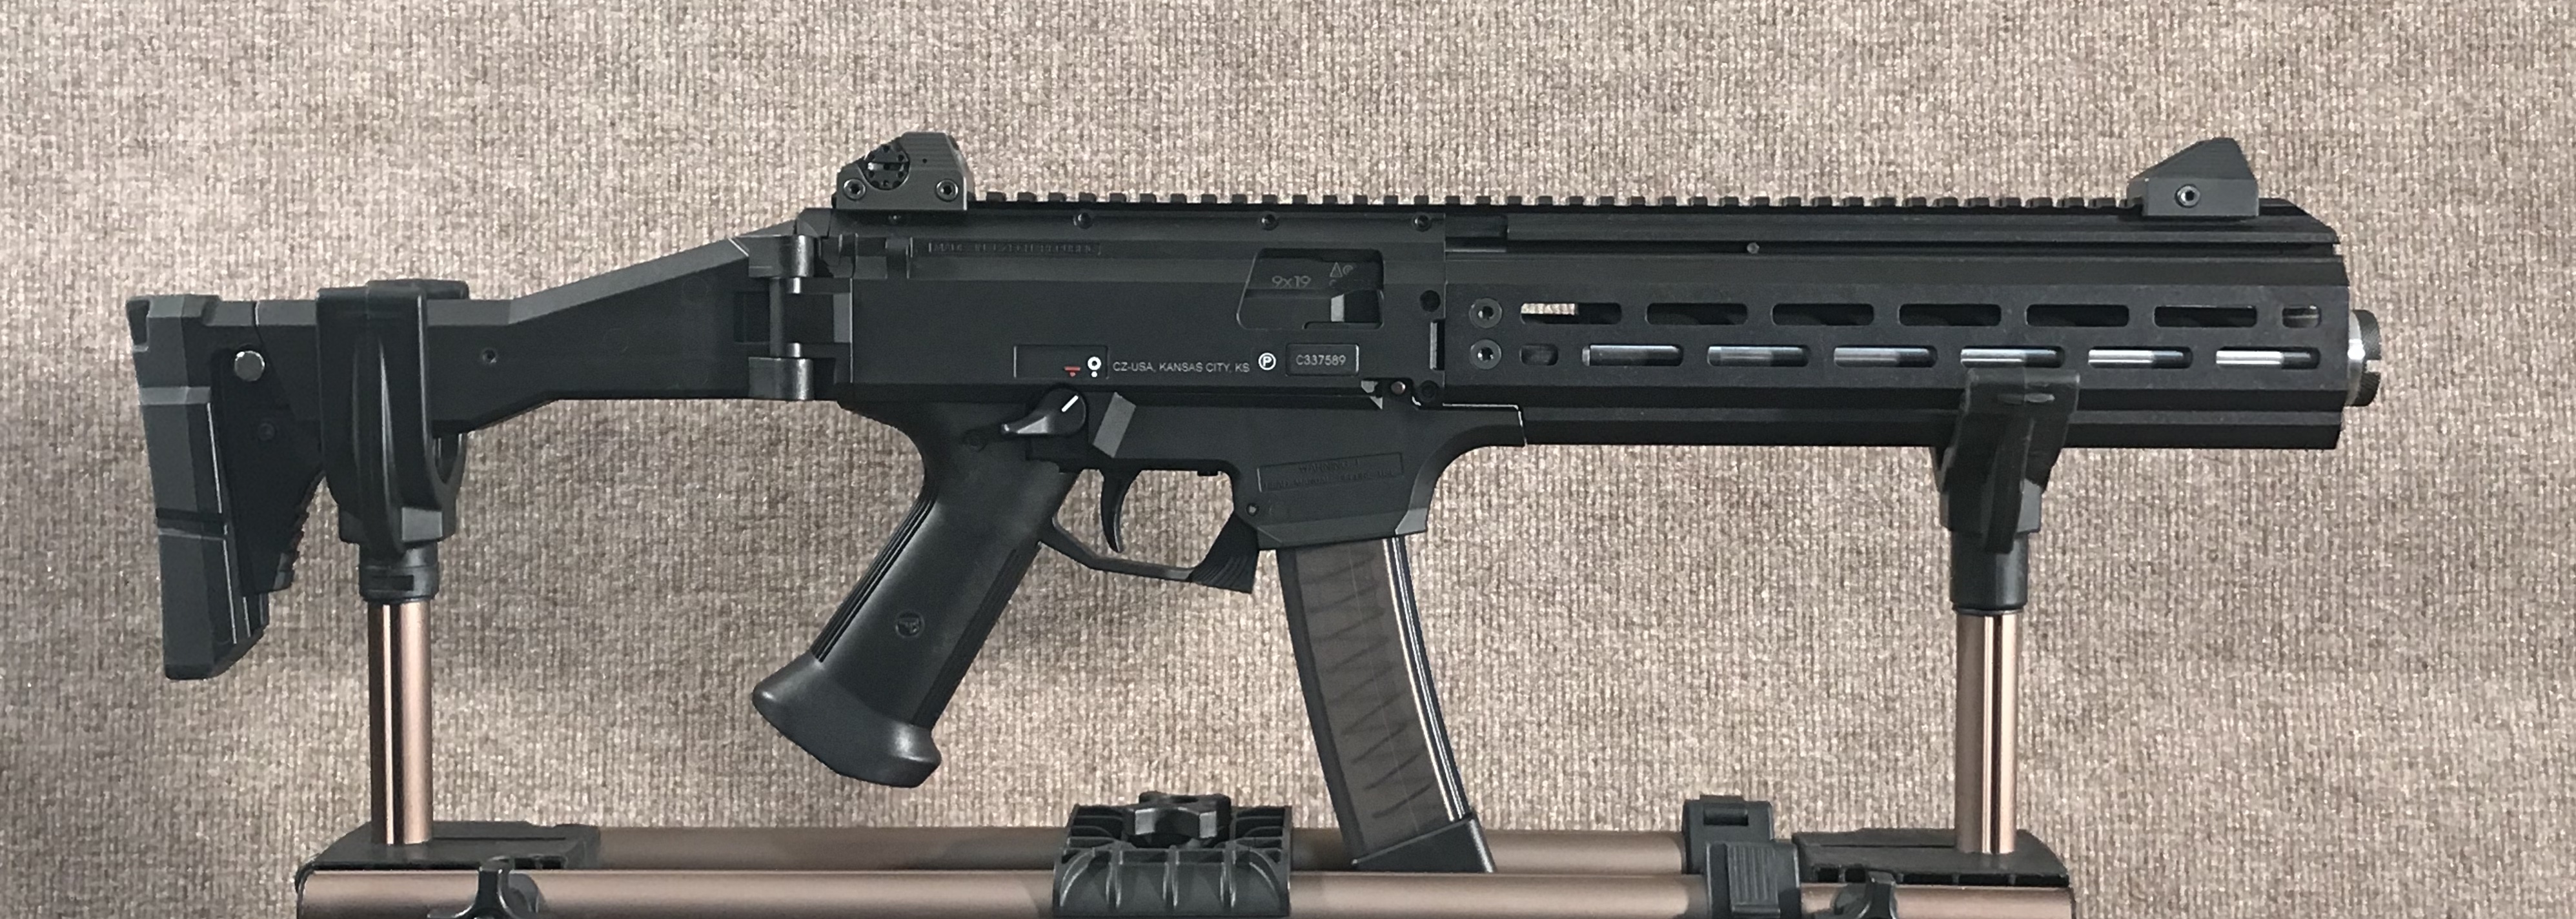 AR 15 Uppers Monolithic Integral Suppressed Barrel Weapon.